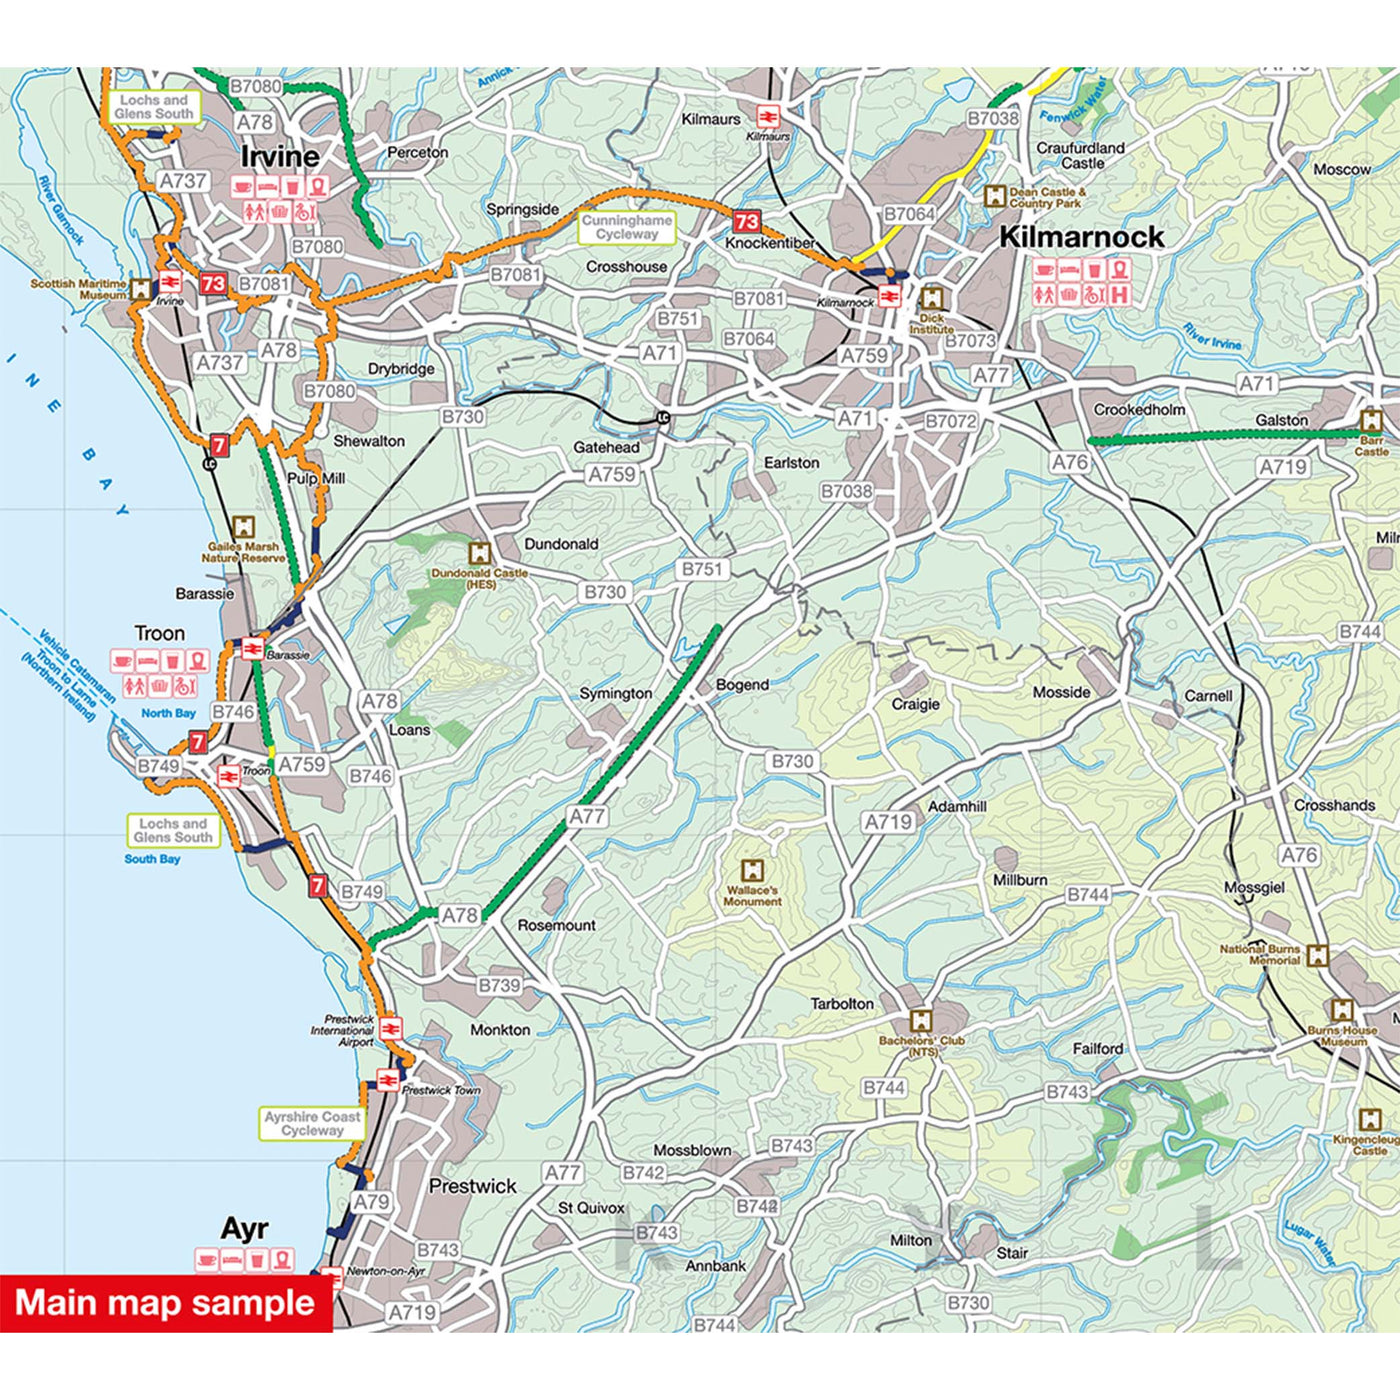 Main map sample for the Ayrshire, Lanark and the Isle of Arran cycle map